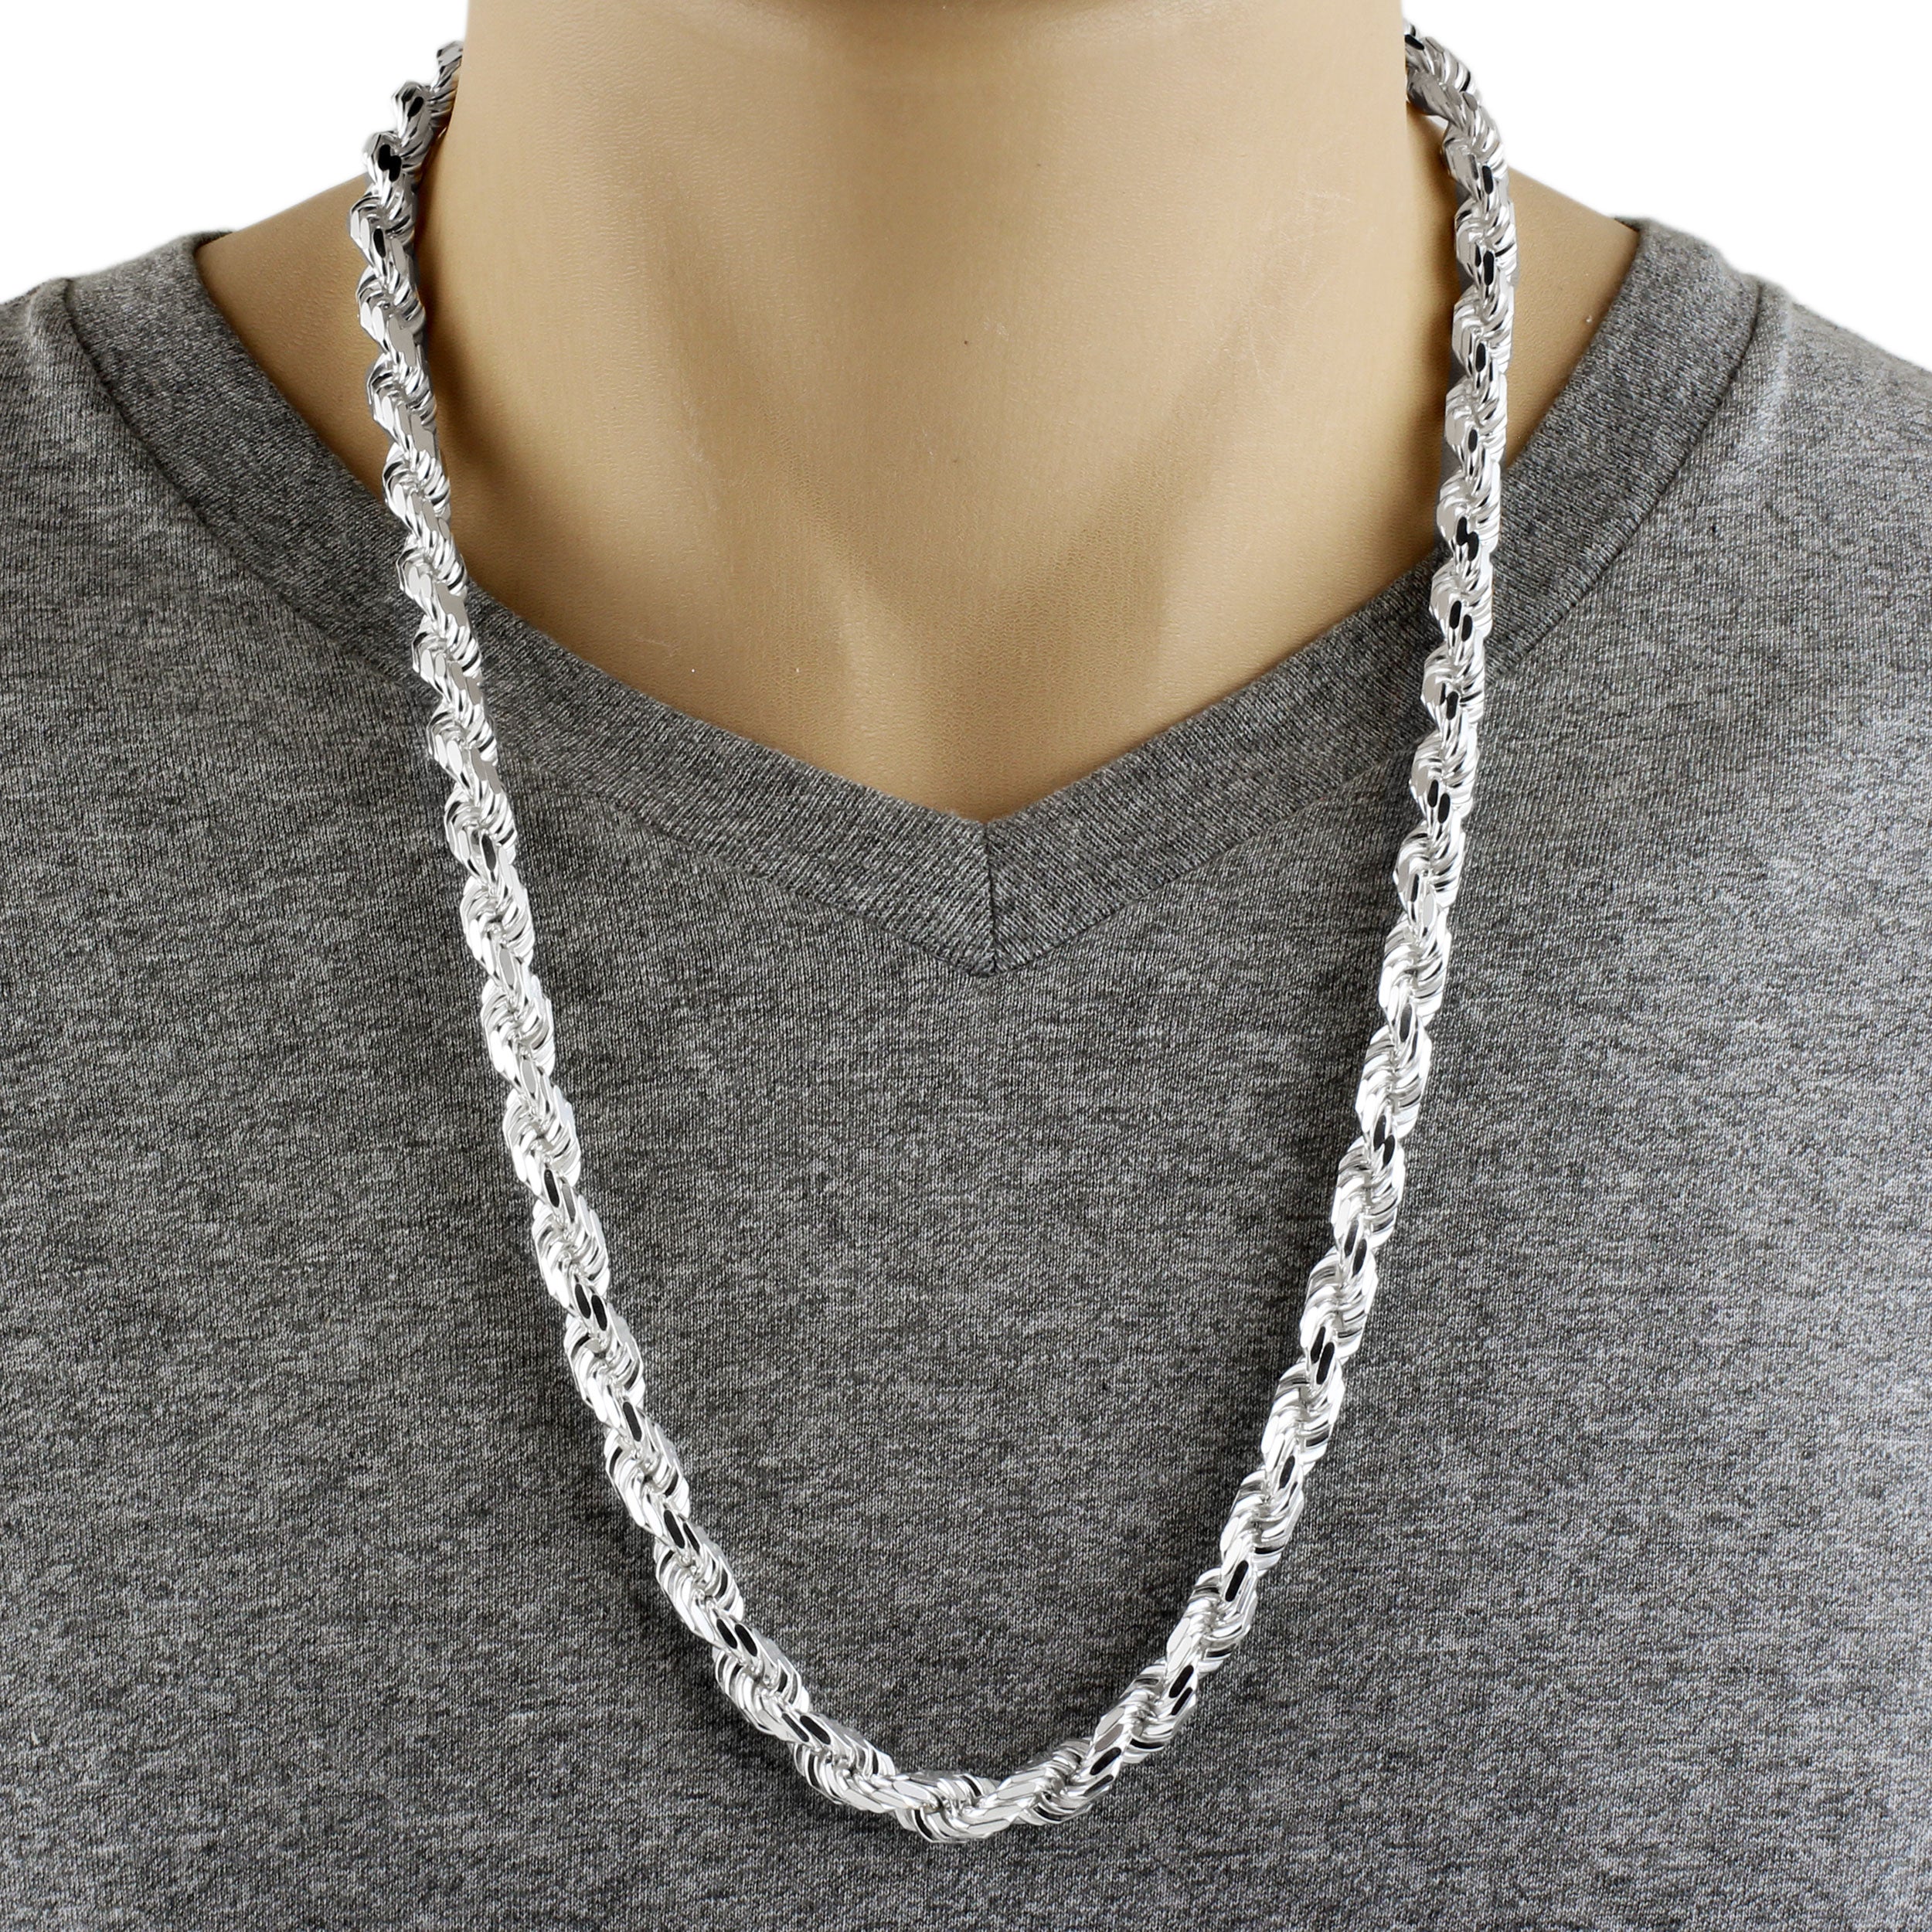 https://www.925express.com/cdn/shop/products/sterling-silver-925-diamond-cut-8mm-ropechain-necklace-wholesale-sterling-silver-jewelry.jpg?v=1654452558